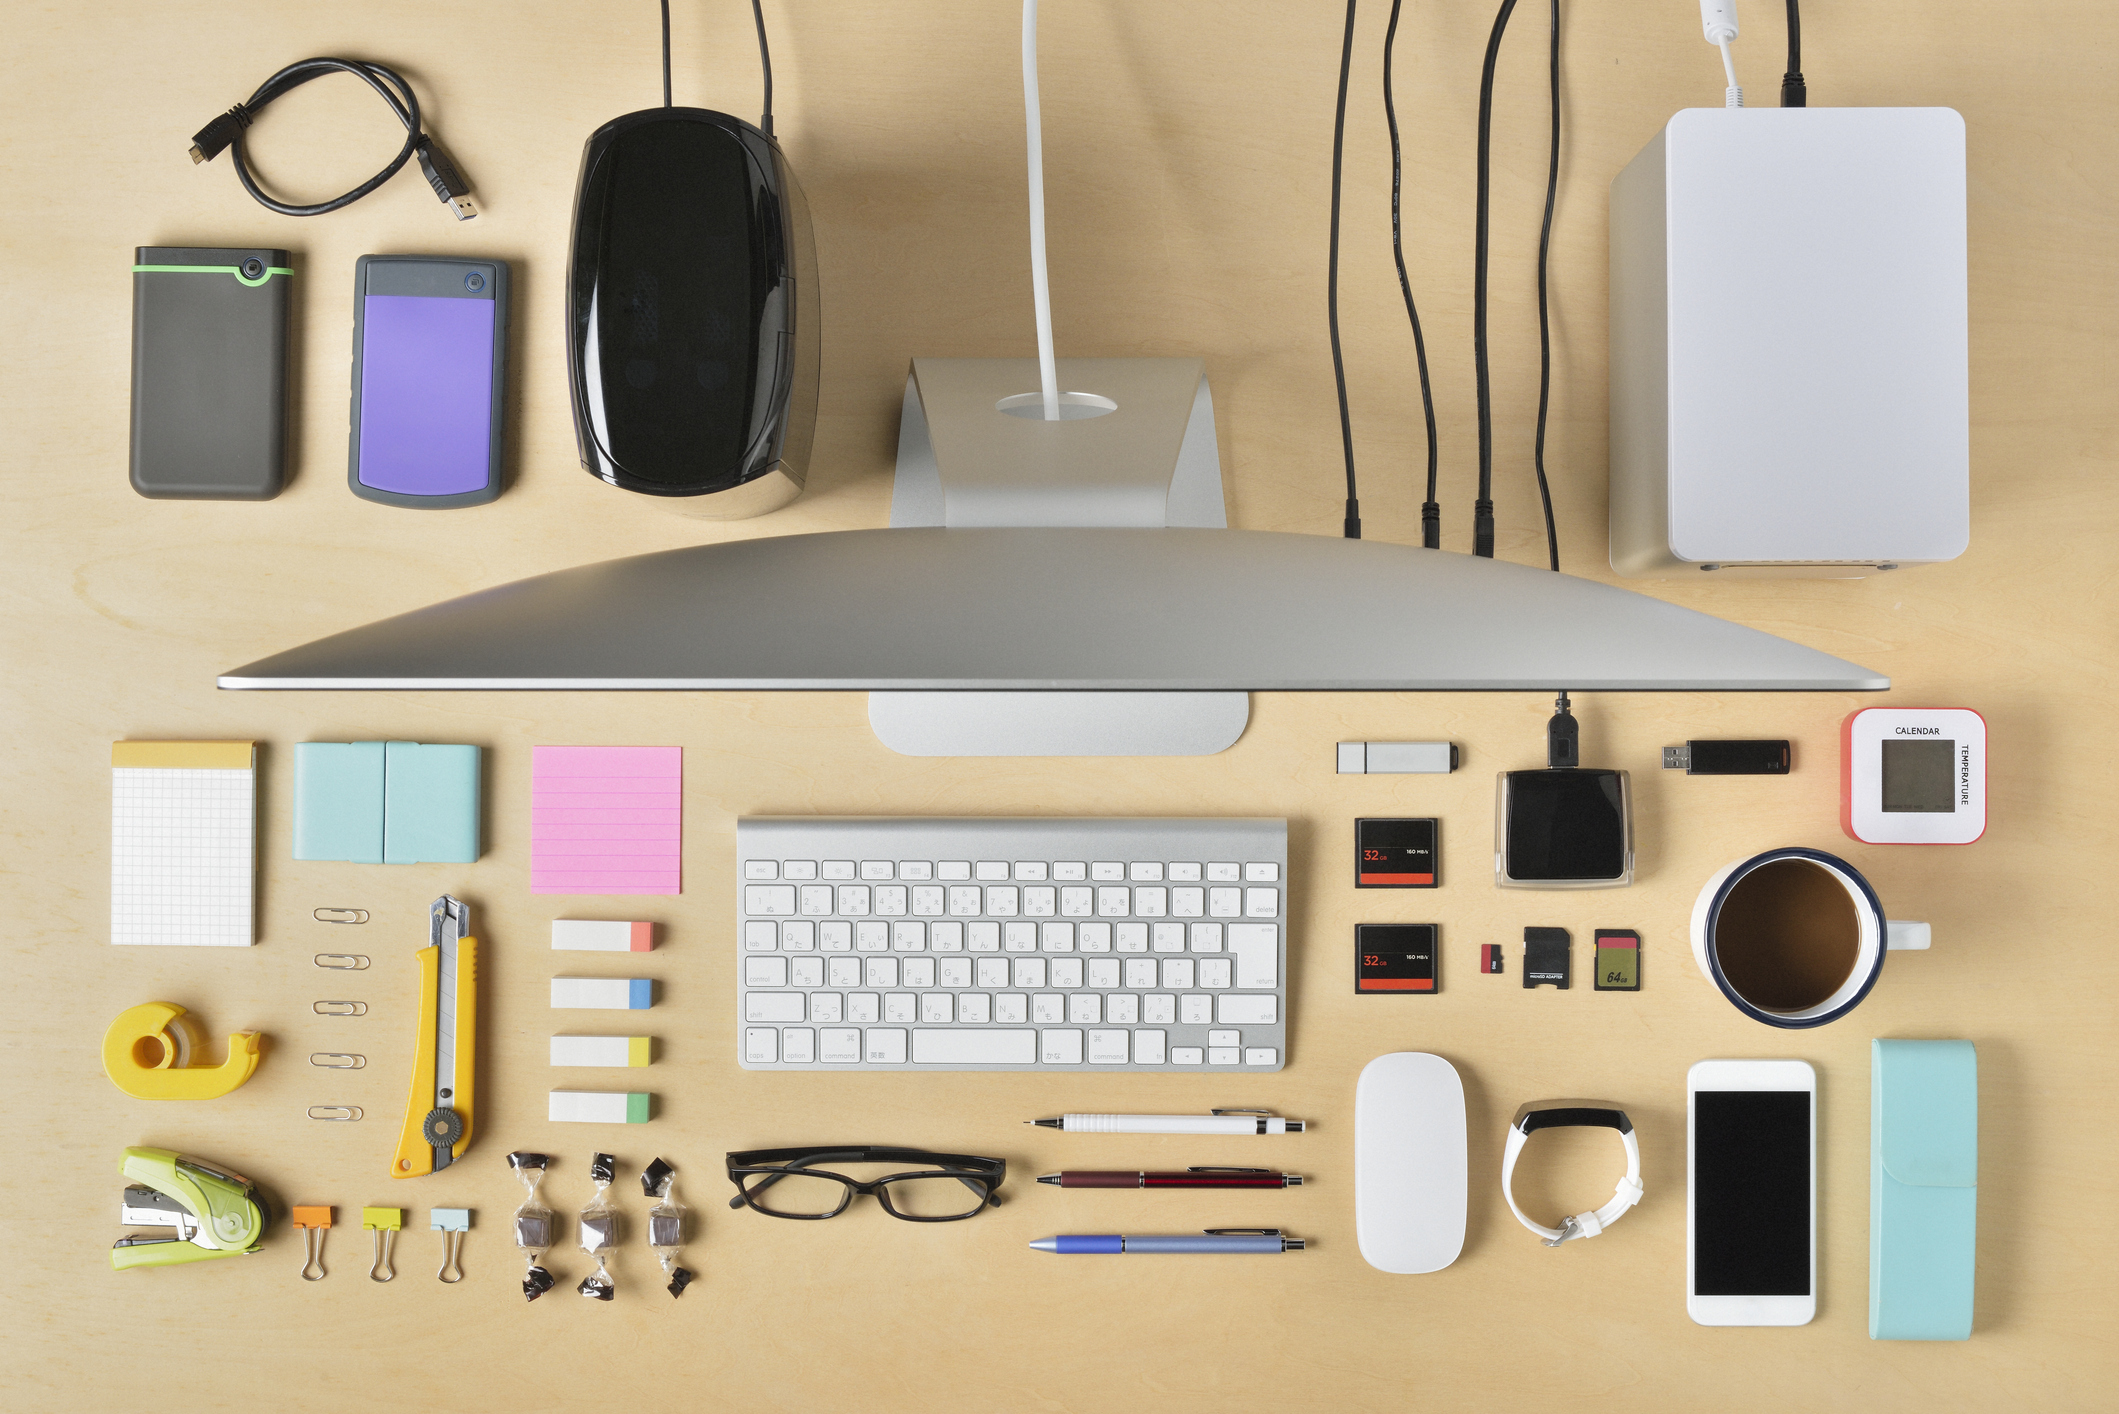 Work at Your Maximum Potential With These Useful Office Gadgets